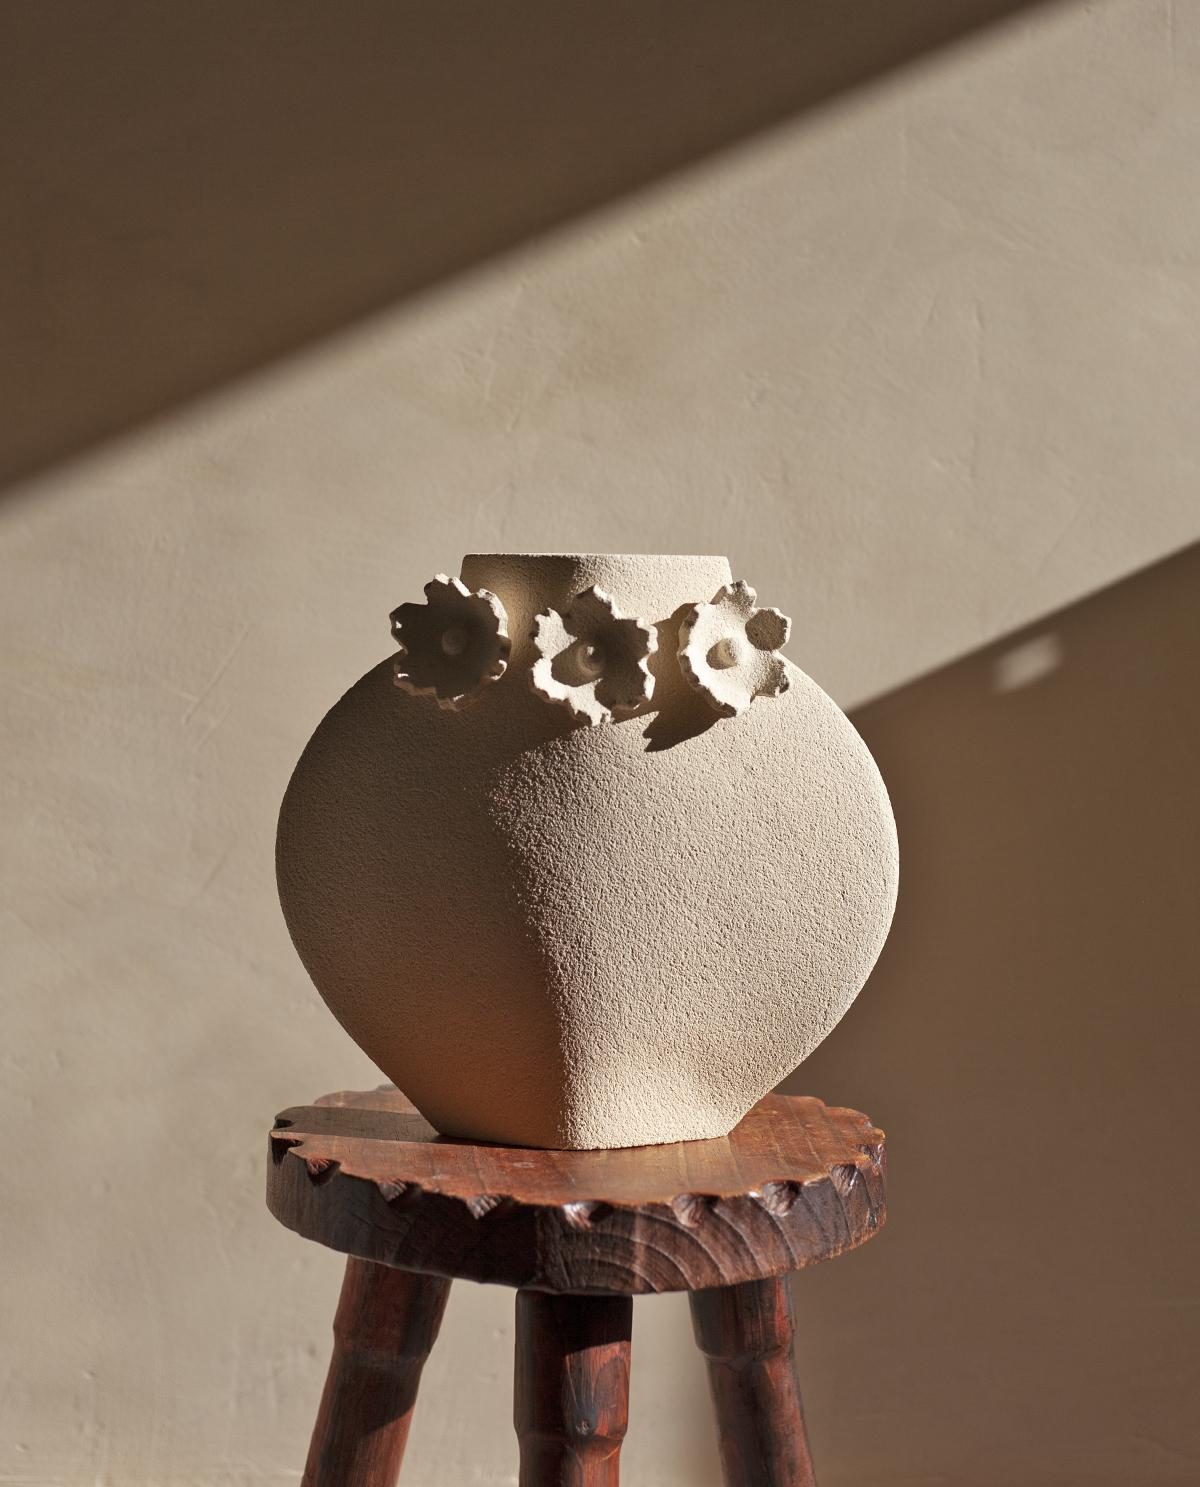 Contemporary 21st Century 'Sculptural Flowers' Vase in White Ceramic, Hand-Crafted in France For Sale